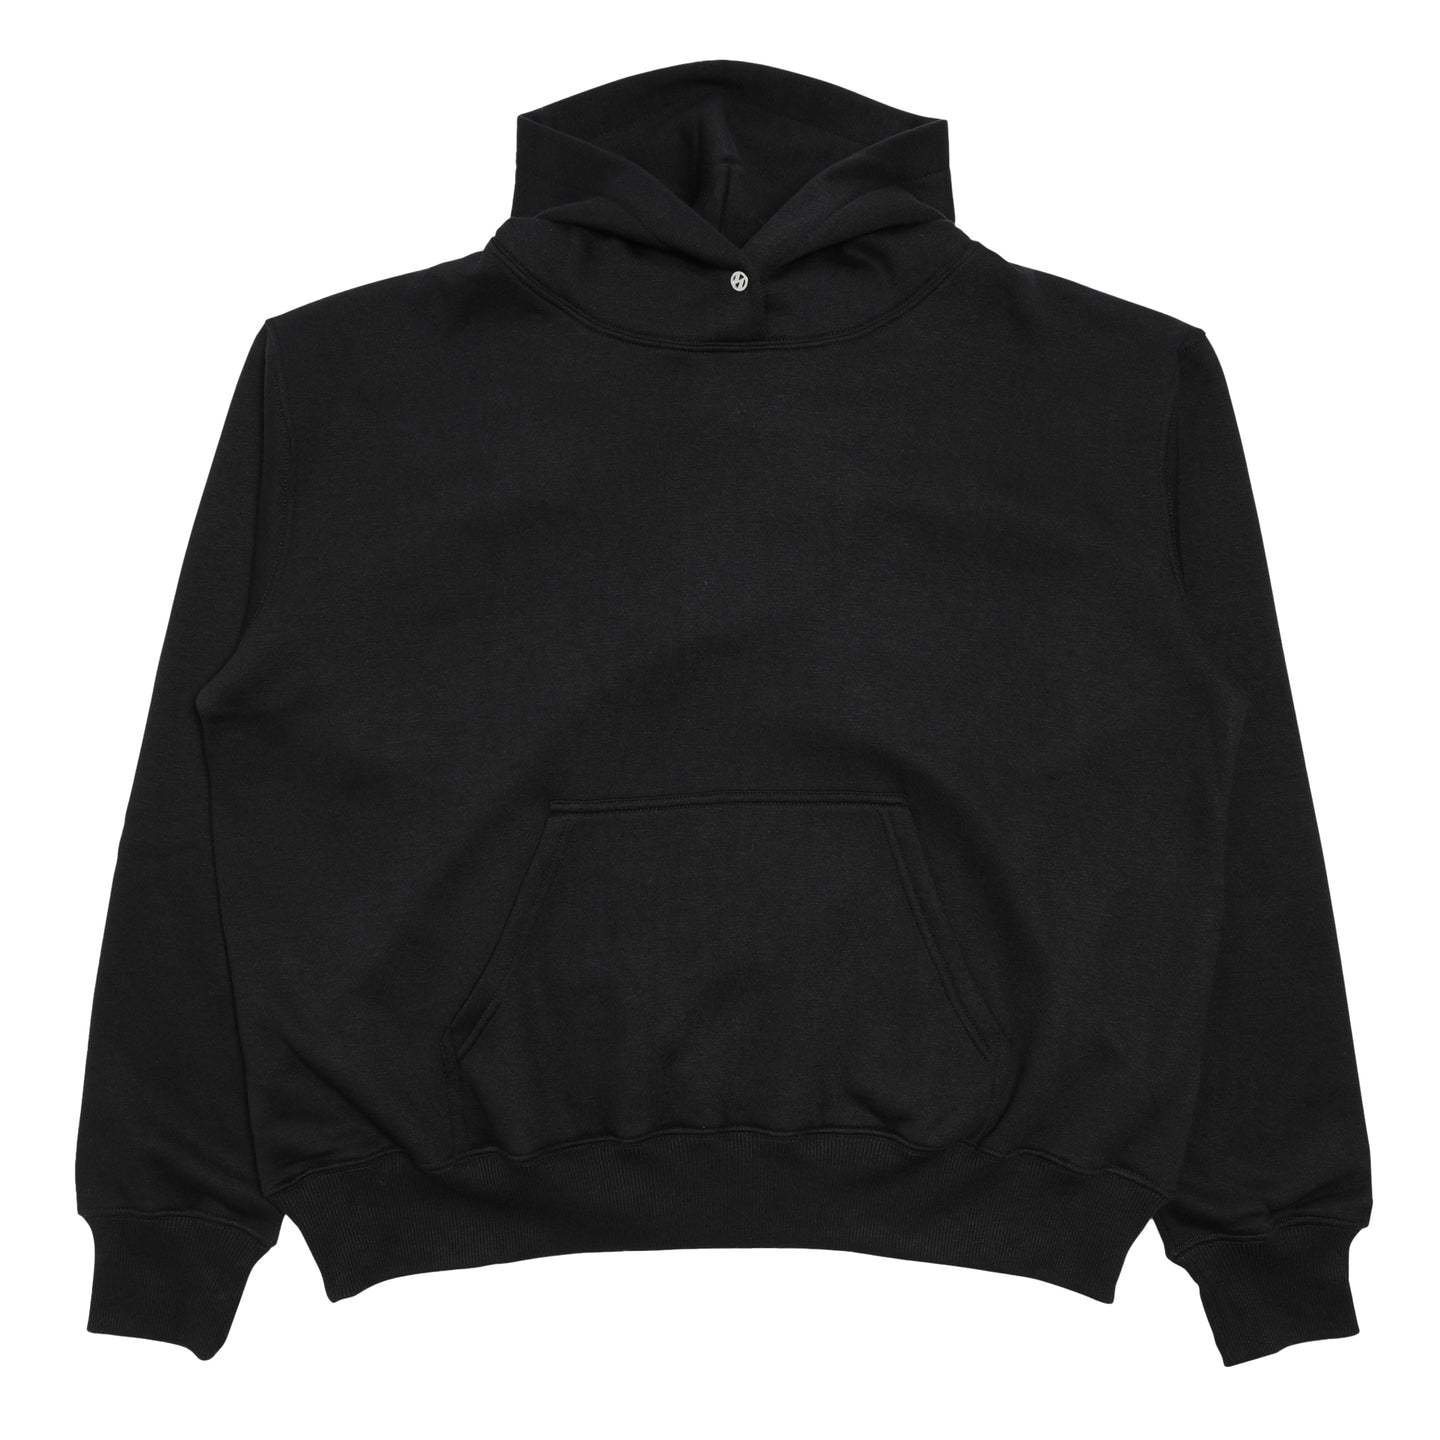 The Salvages Snap Hooded Sweater Black